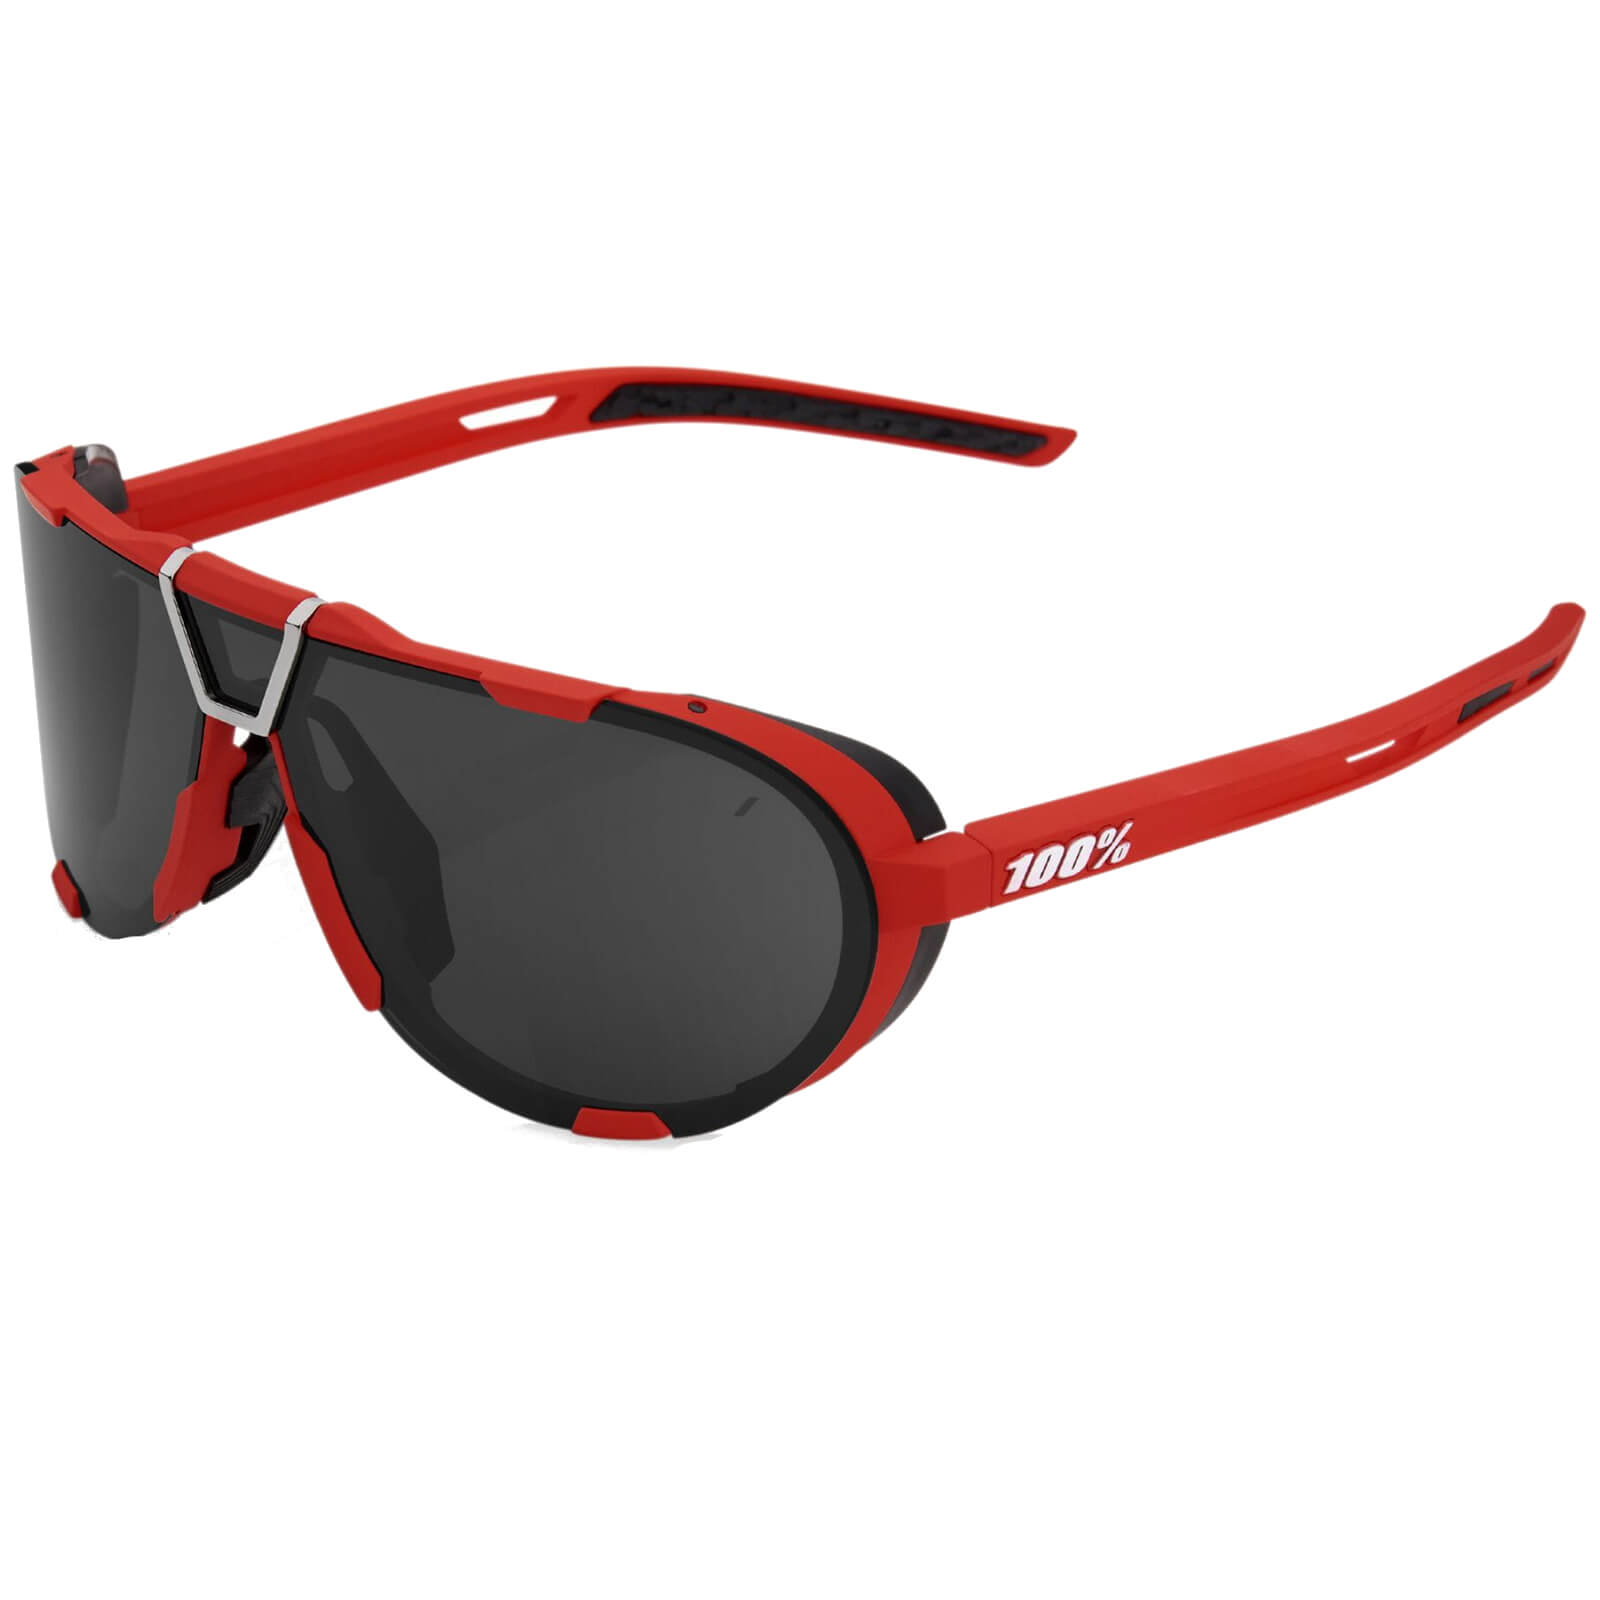 100% Westcraft Sunglasses with Mirror Lens - Soft Tact/Red/Black